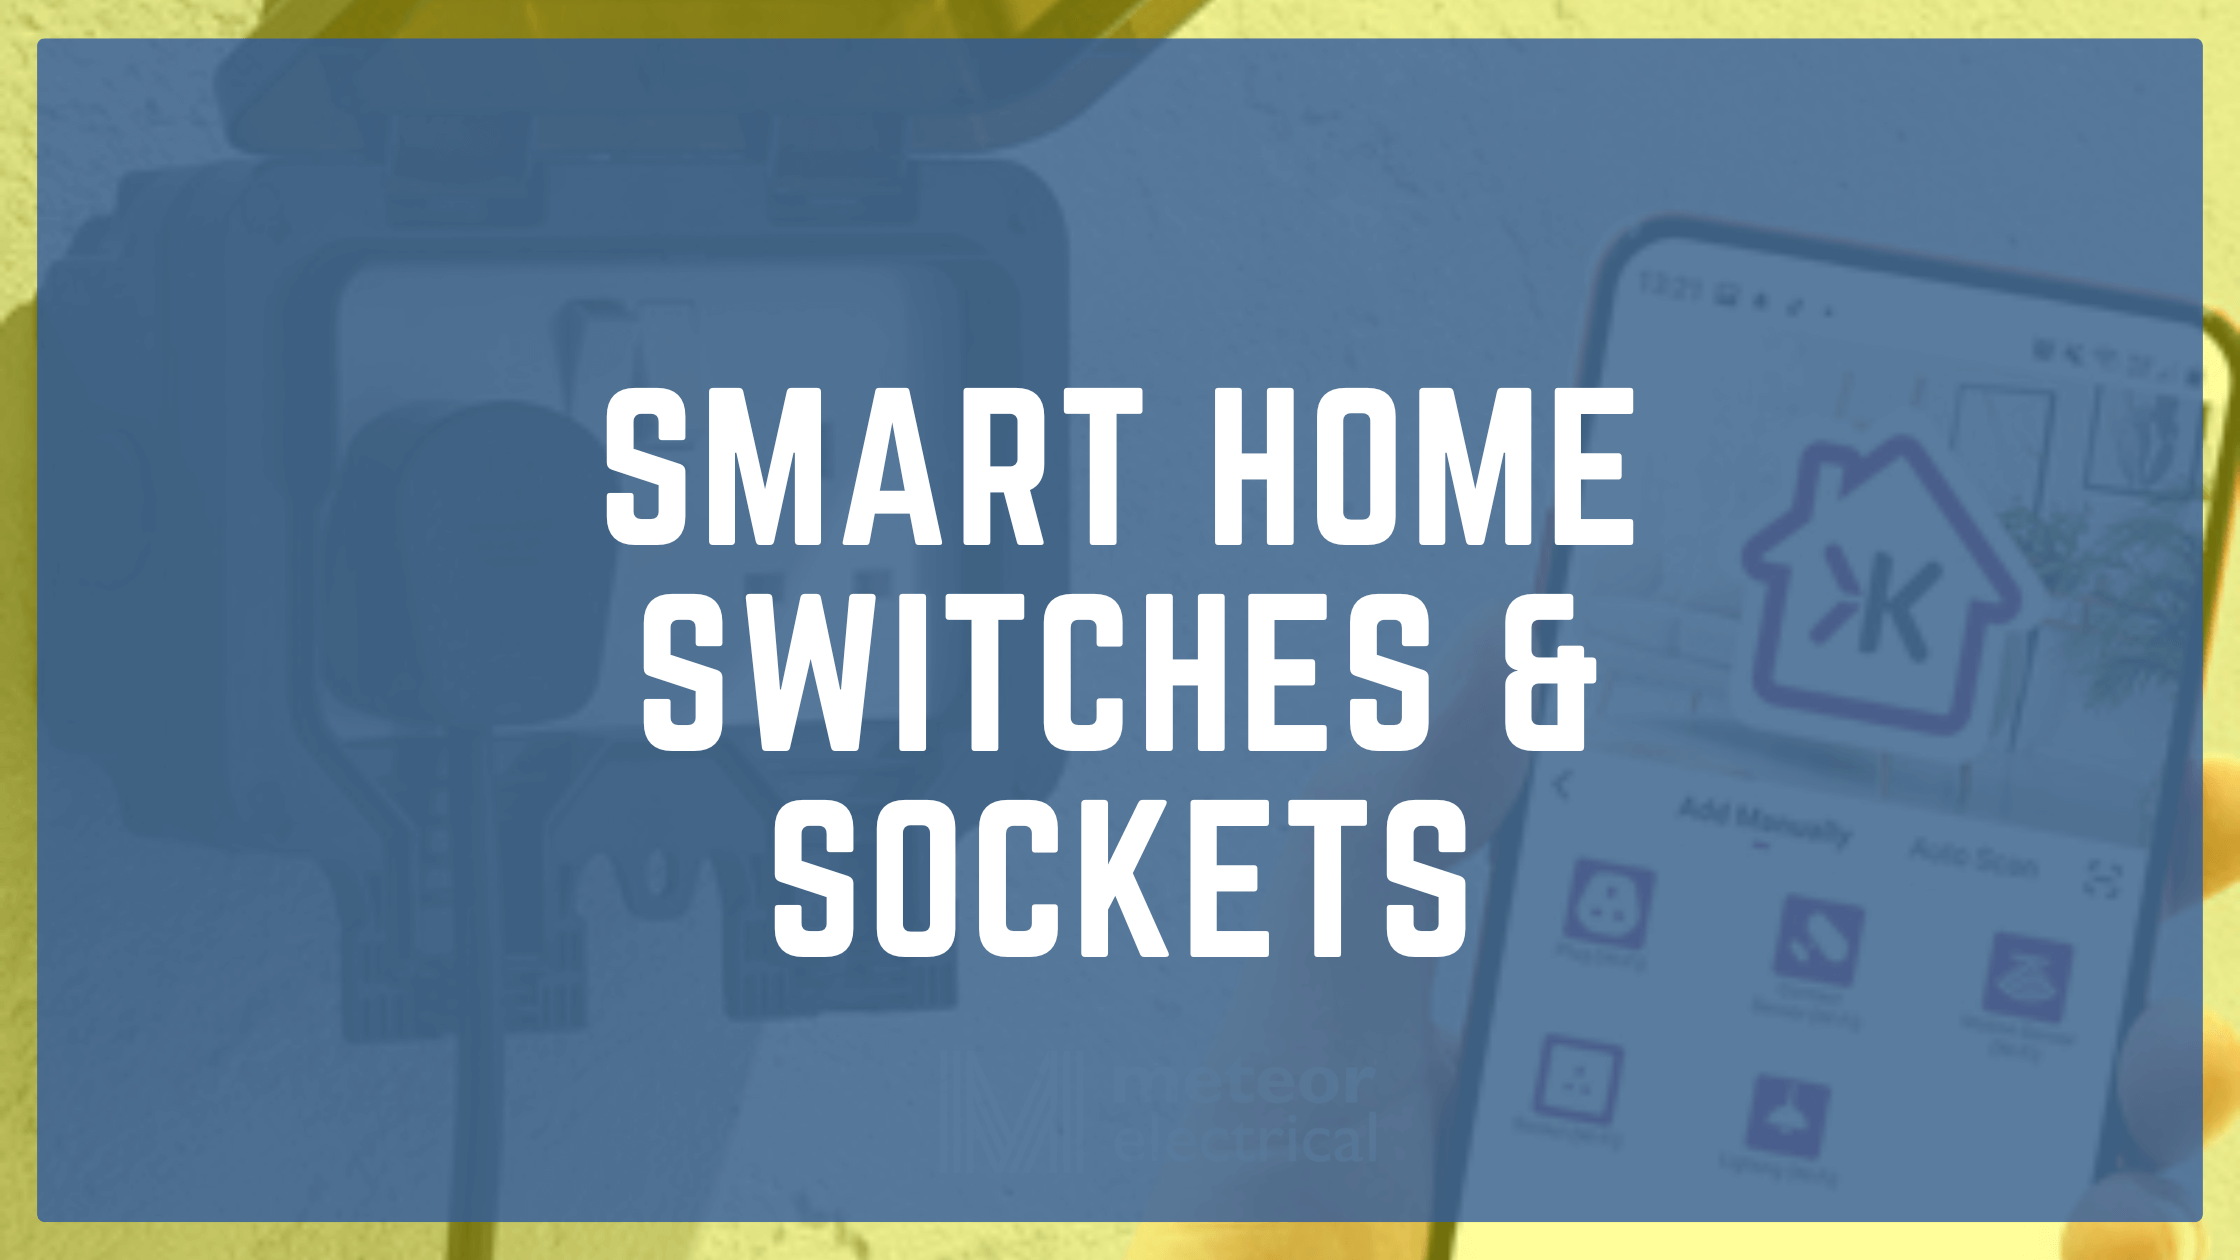 Smart Home Switches & Sockets